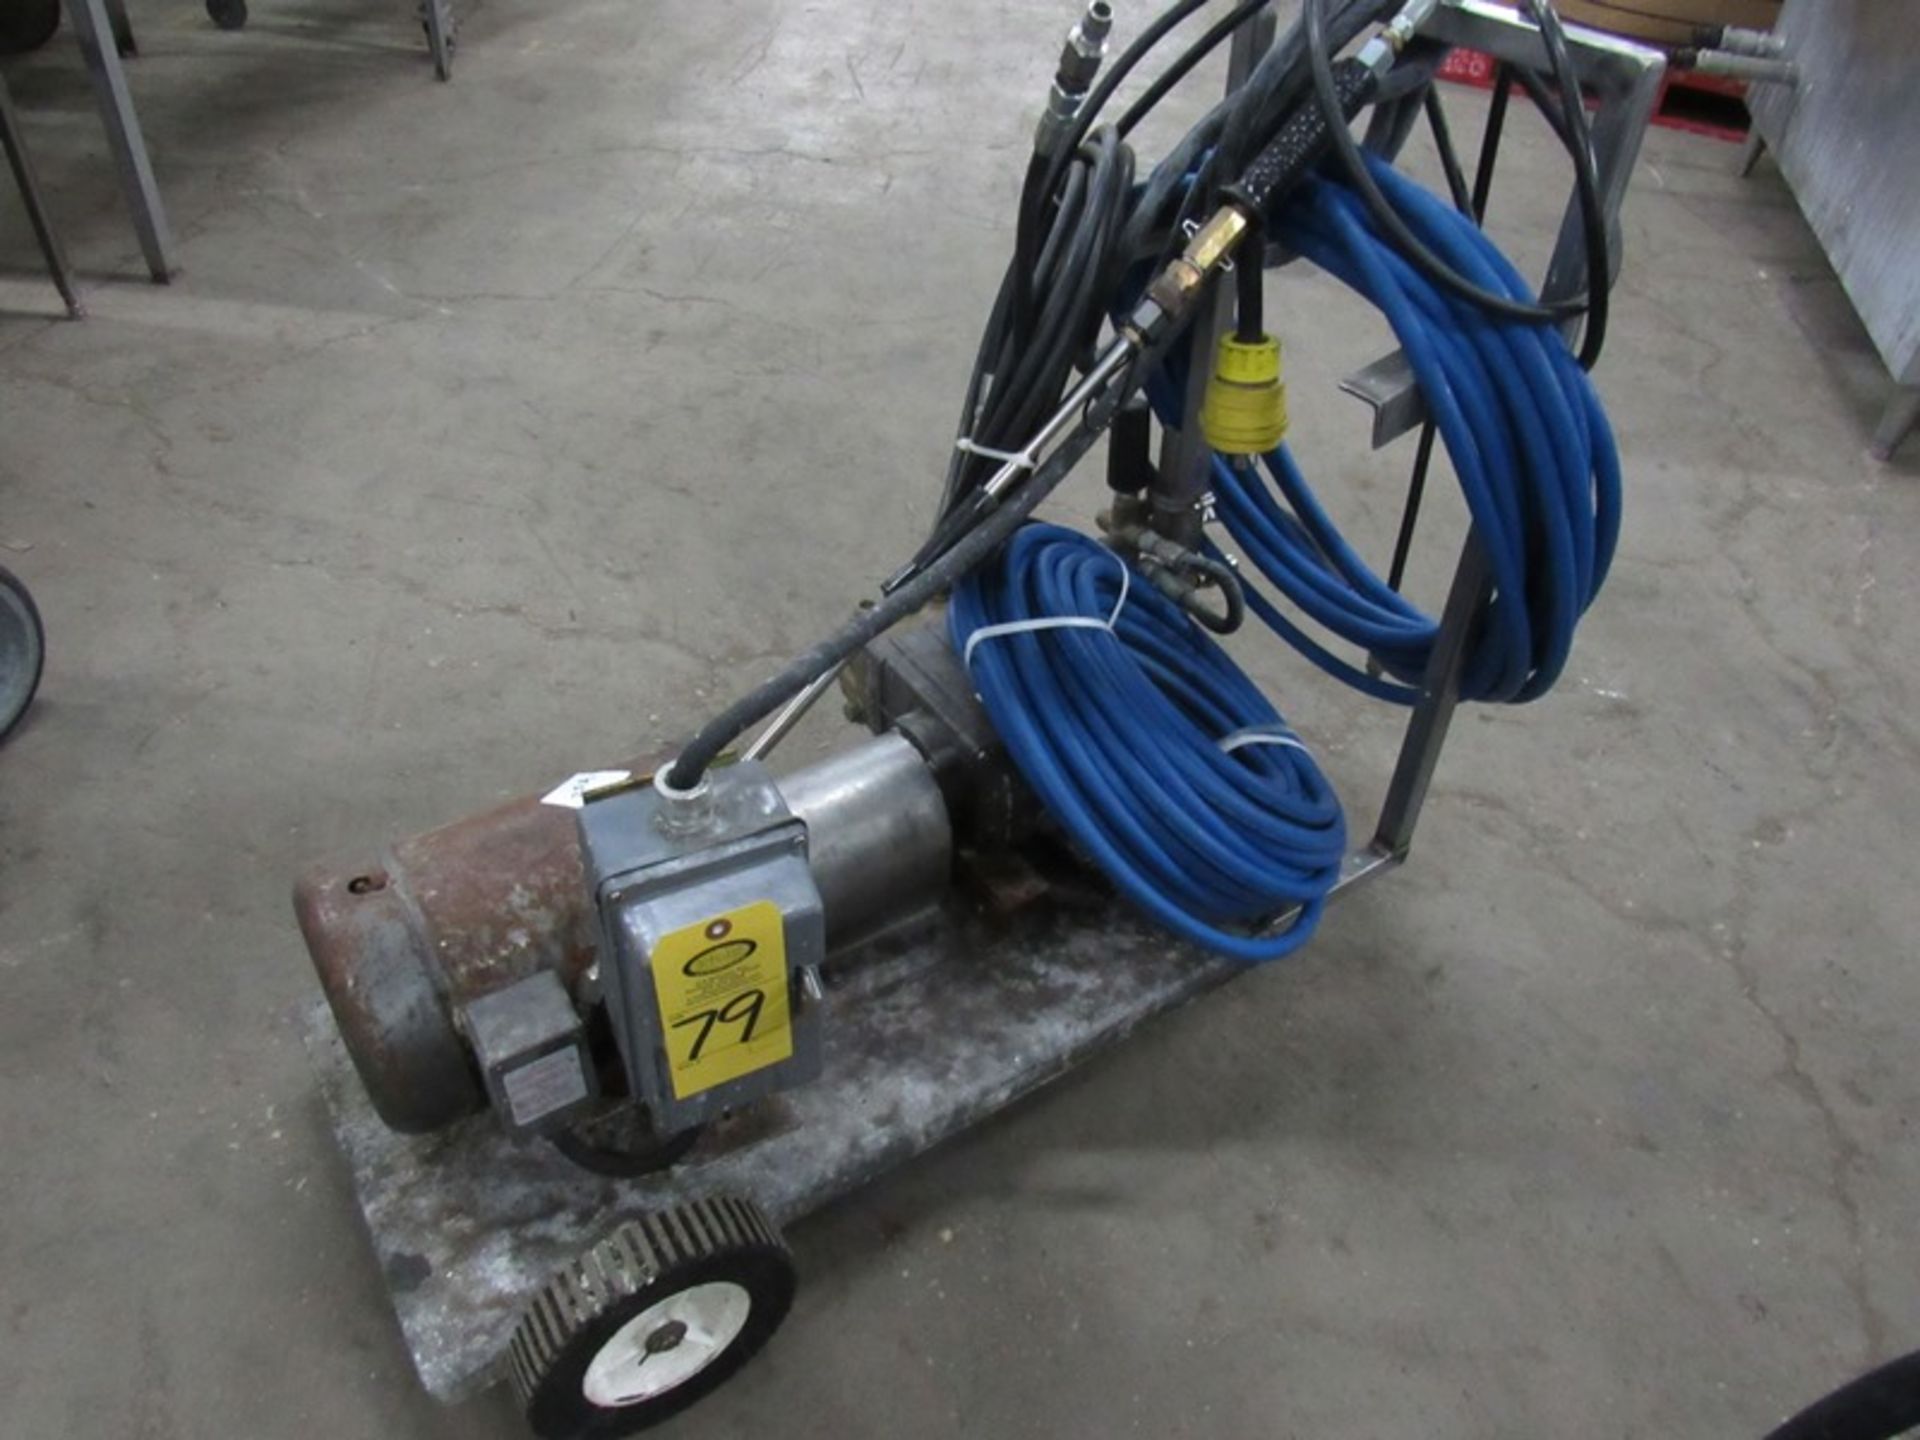 Portable Pressure Washer with wand, 3 h.p., 220 volts;*** All Funds Must Be Received By Friday,